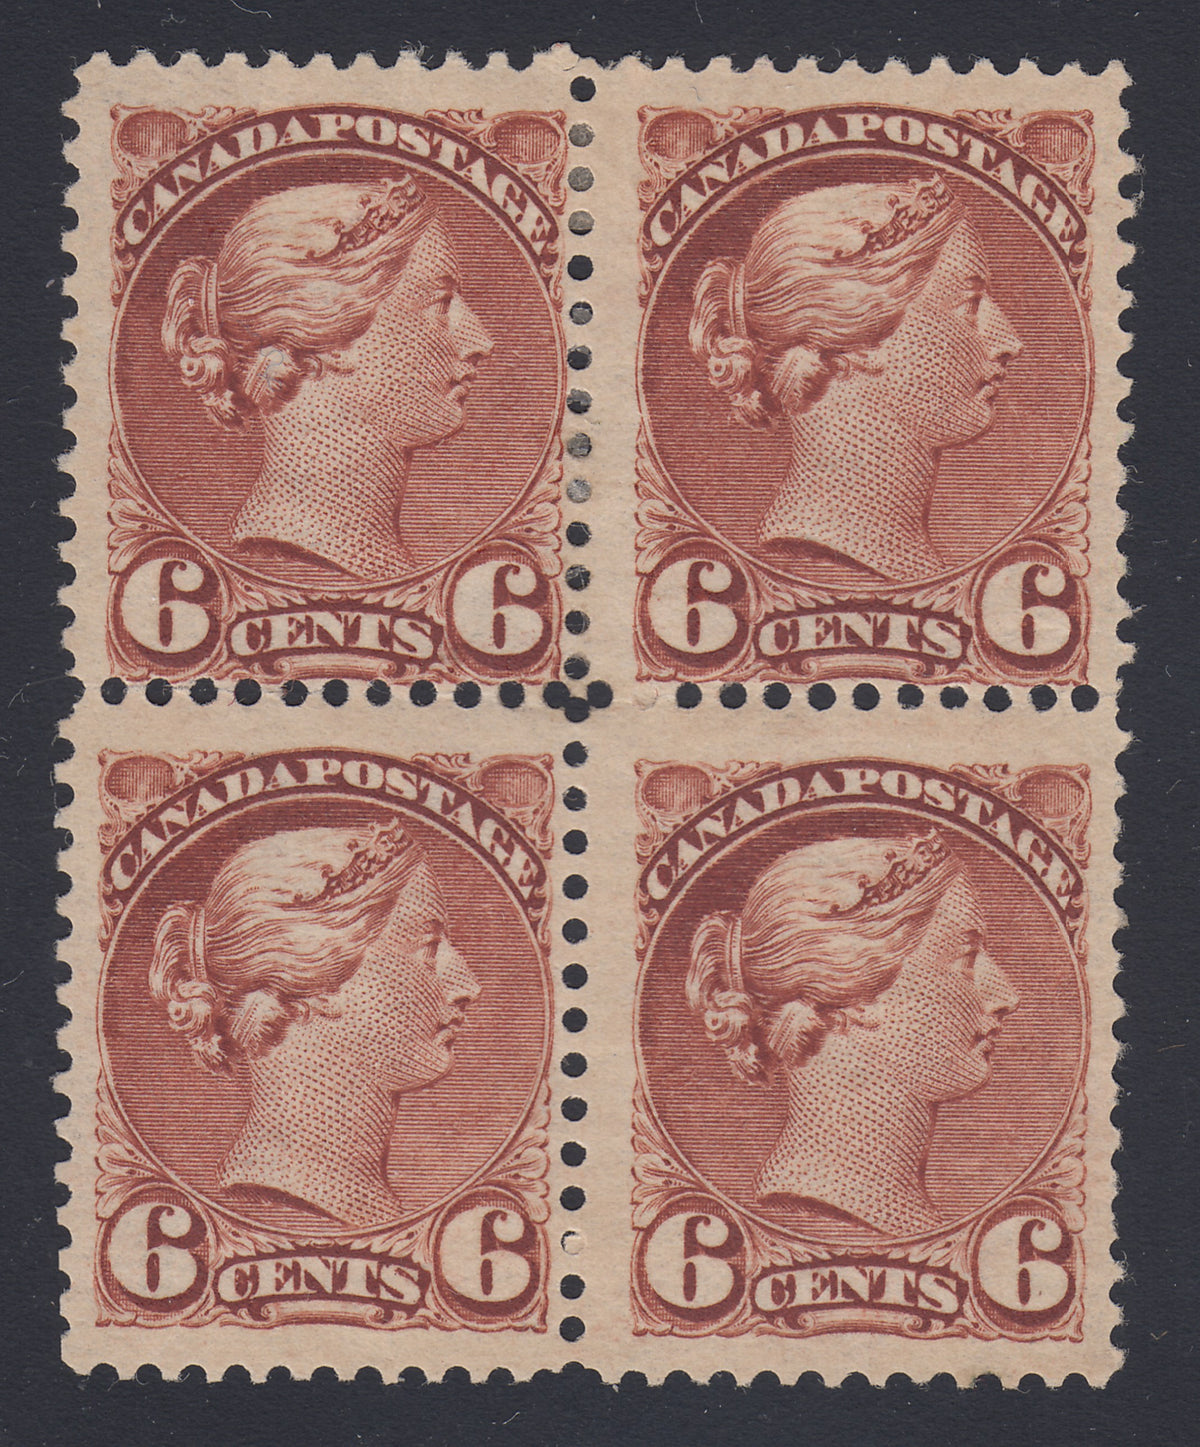 0043CA1803 - Canada #43c - Mint Block of 4 Re-entry